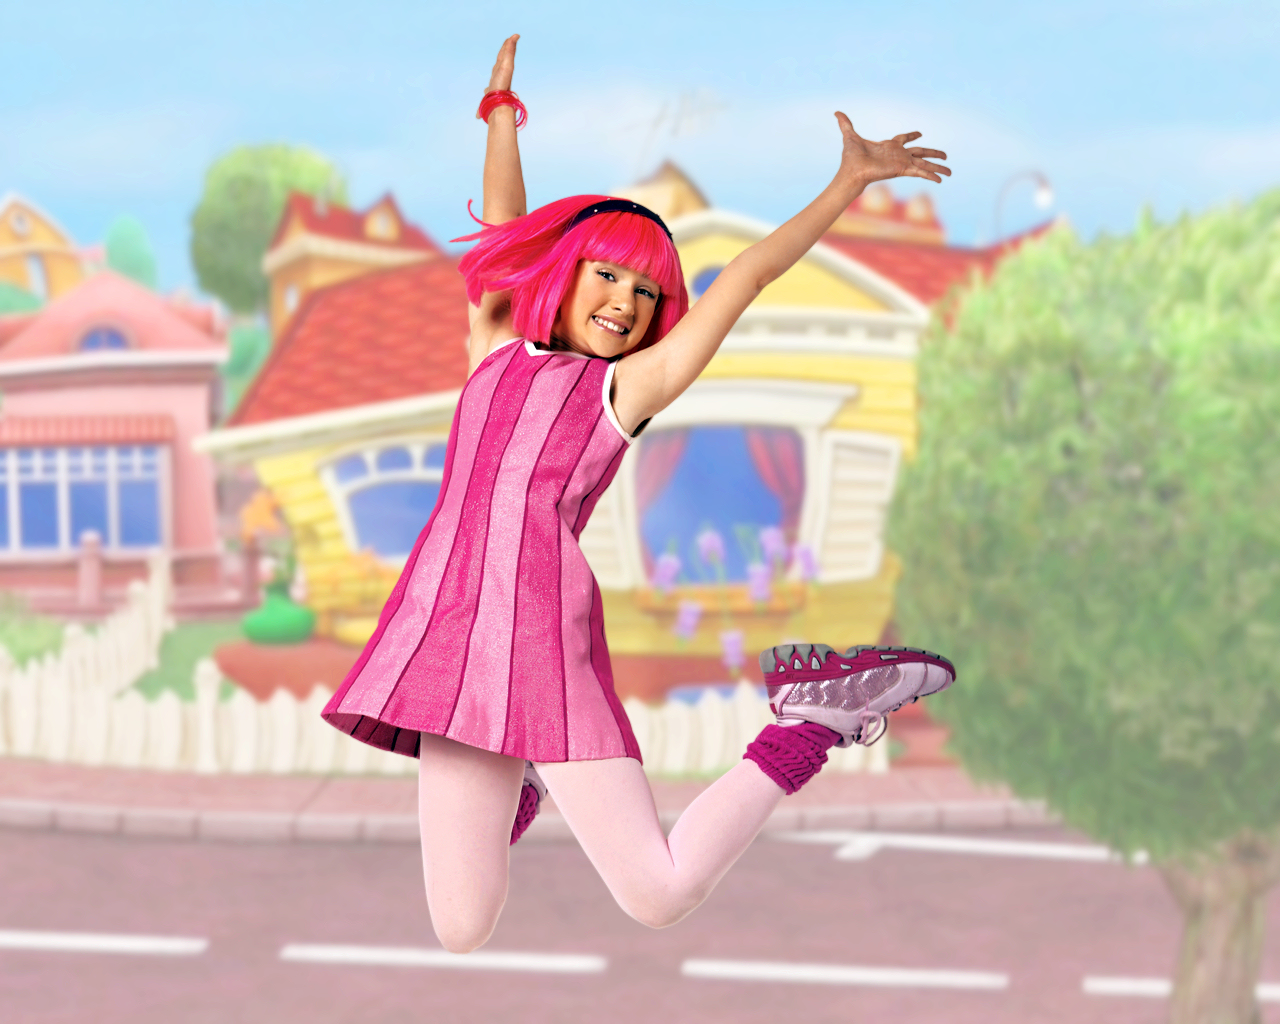 44 LazyTown HD Wallpapers Backgrounds - Wallpaper Abyss